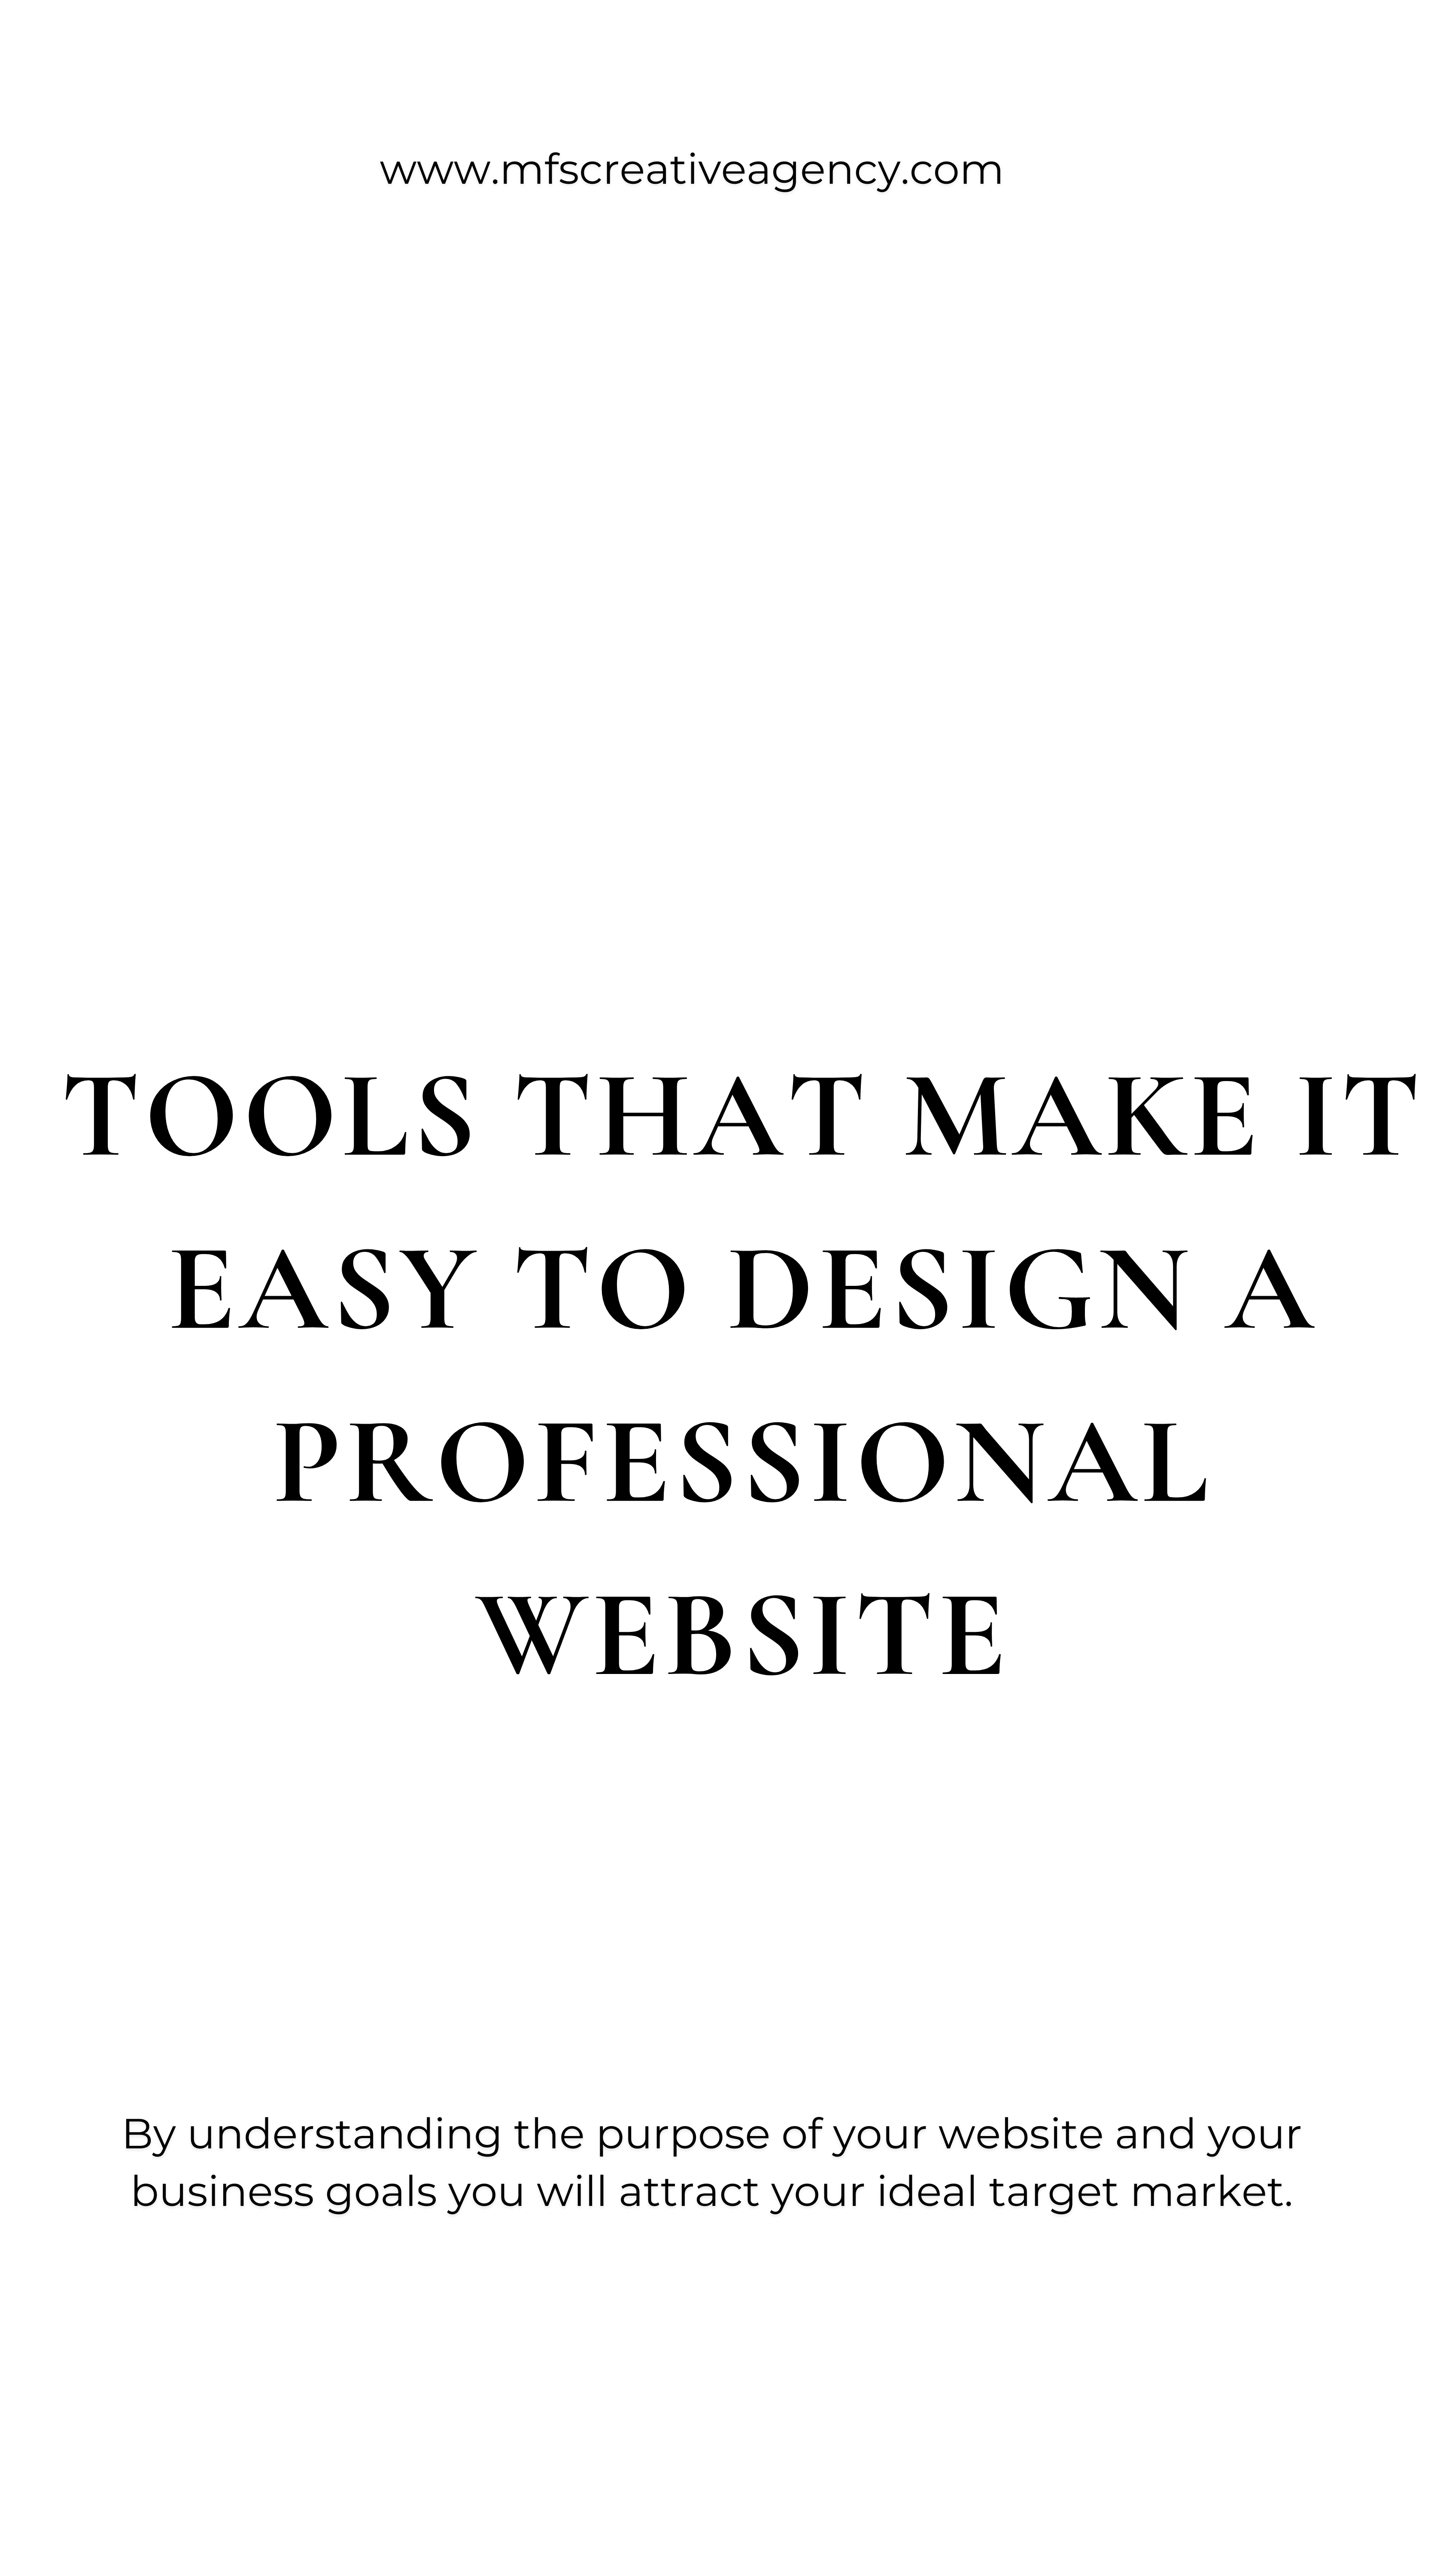 Tools That Make It Easy To Design A Professional Website